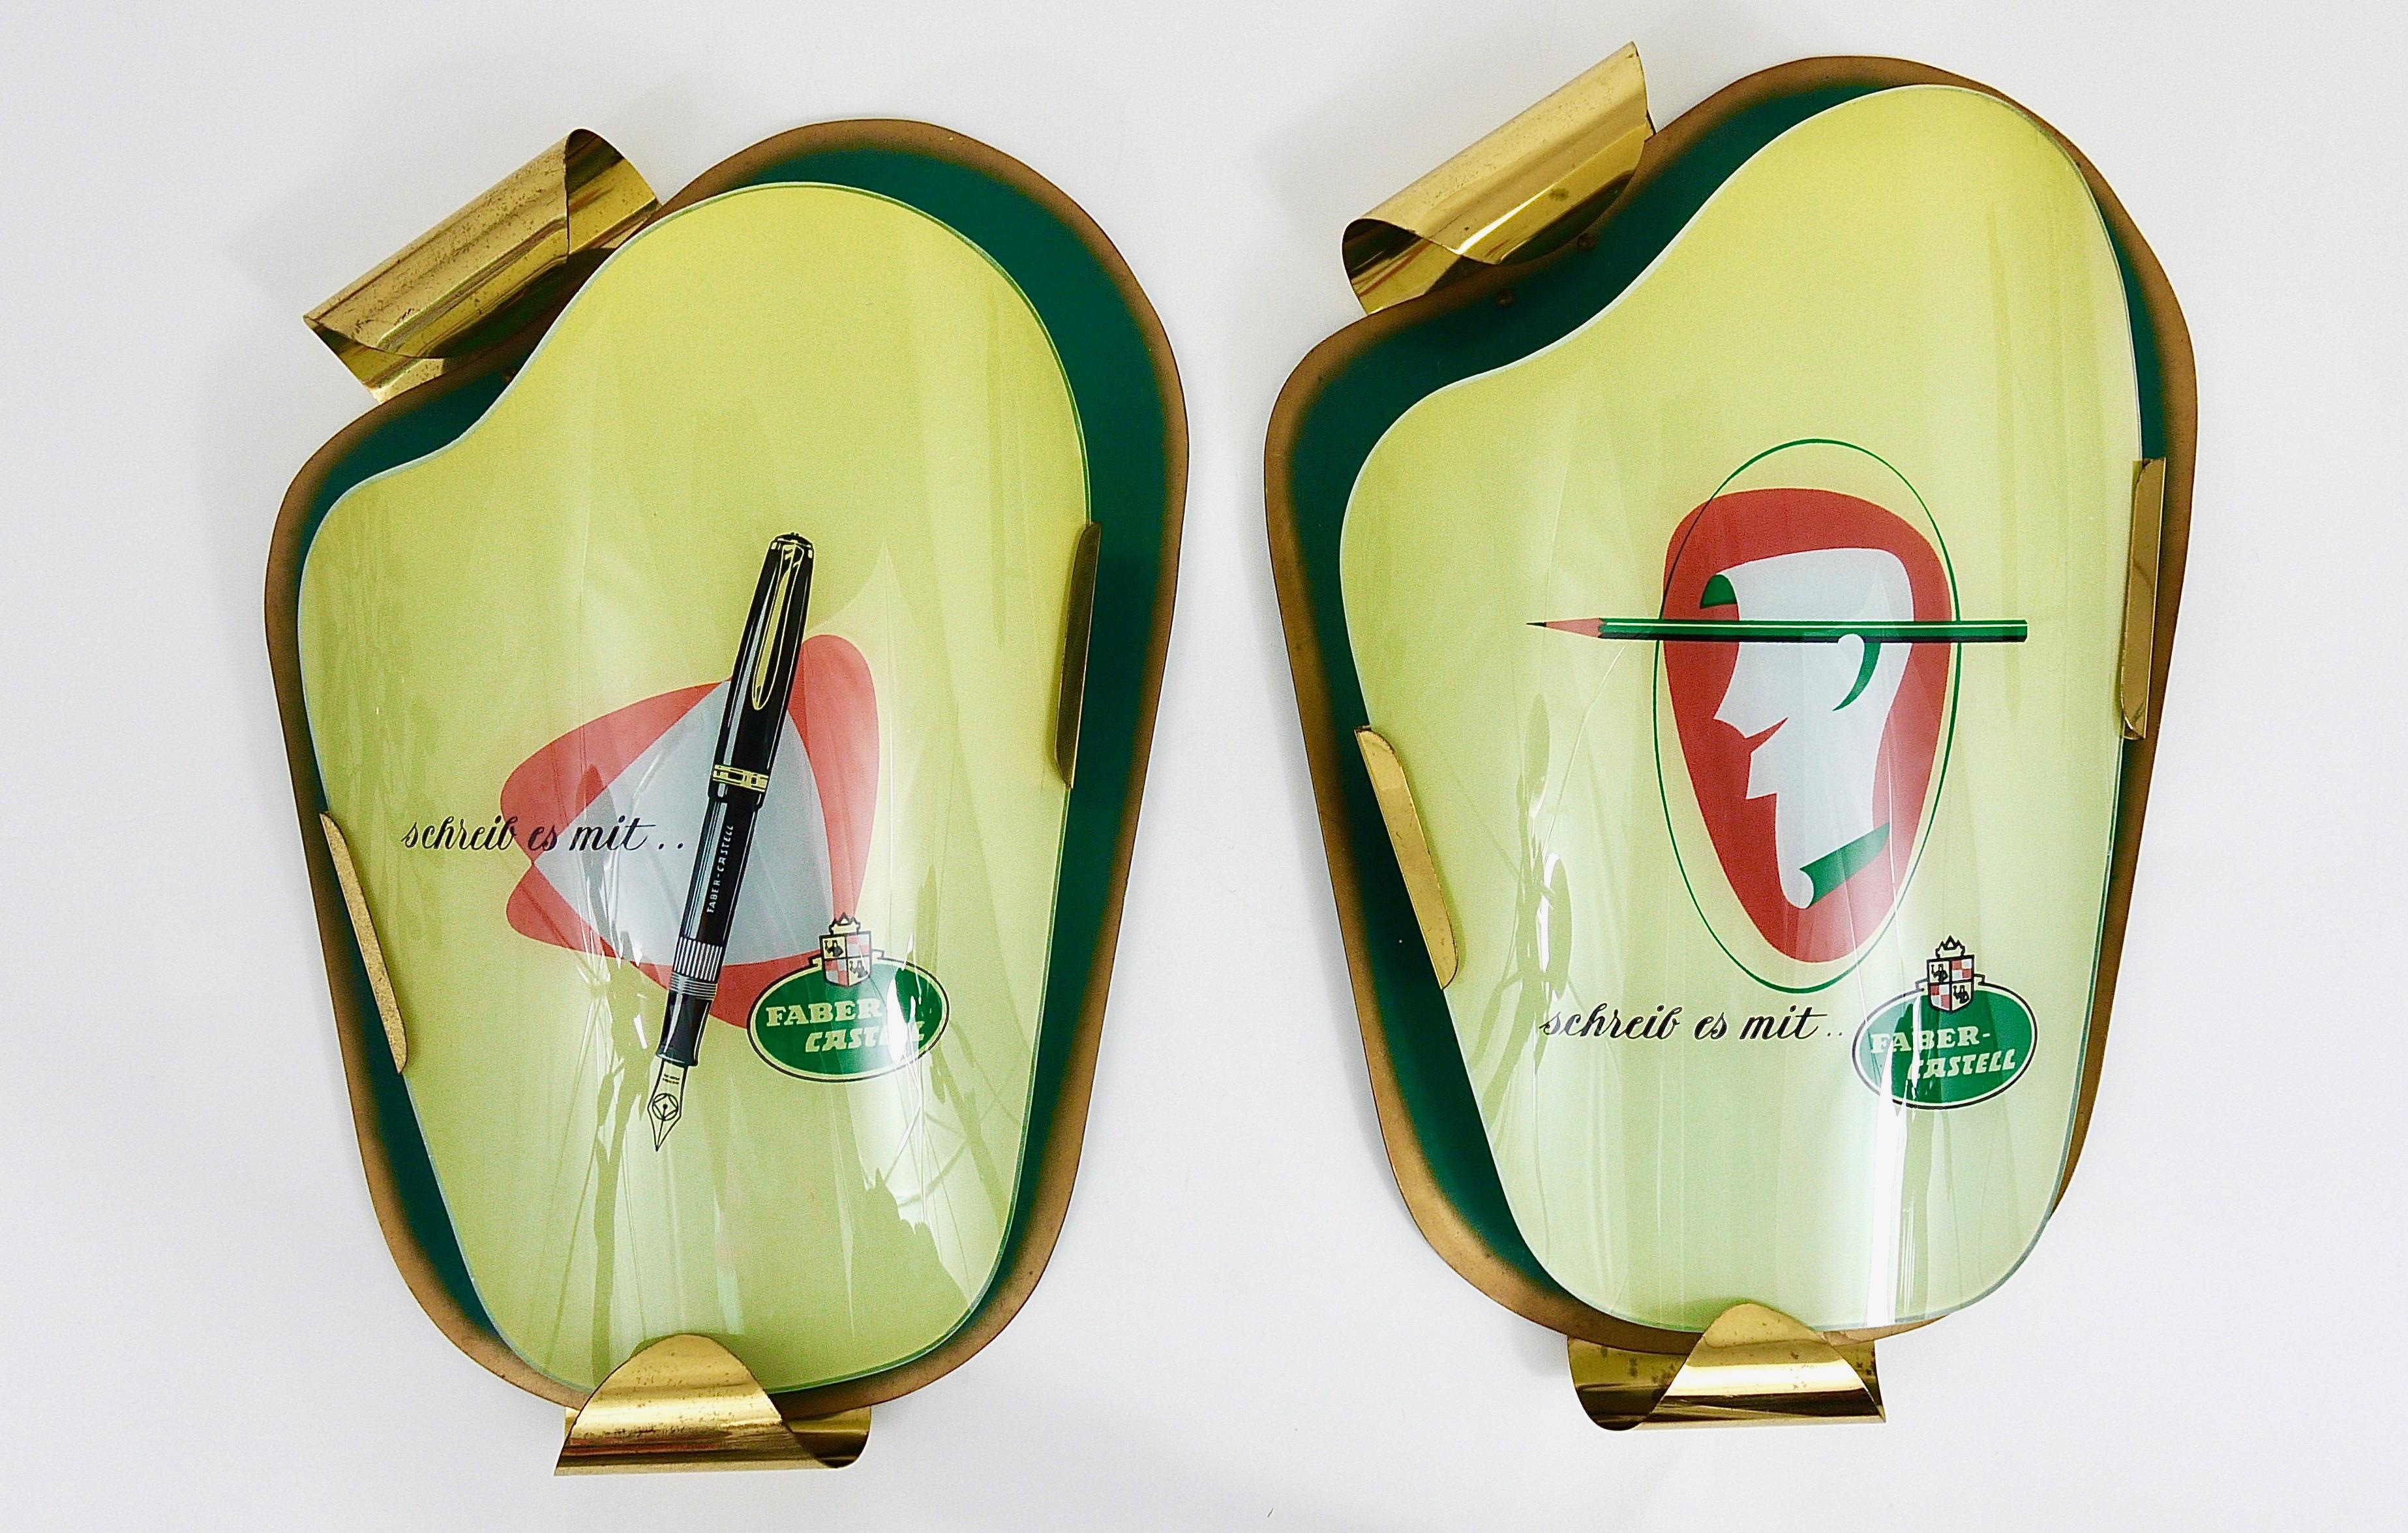 A beautiful asymmetrical midcentury advertising wall light for Faber-Castell pencils. A charming piece from the 1950s, made of brass and green lacquered metal and a front made of real glass. This advertising sign is in very good condition with nice